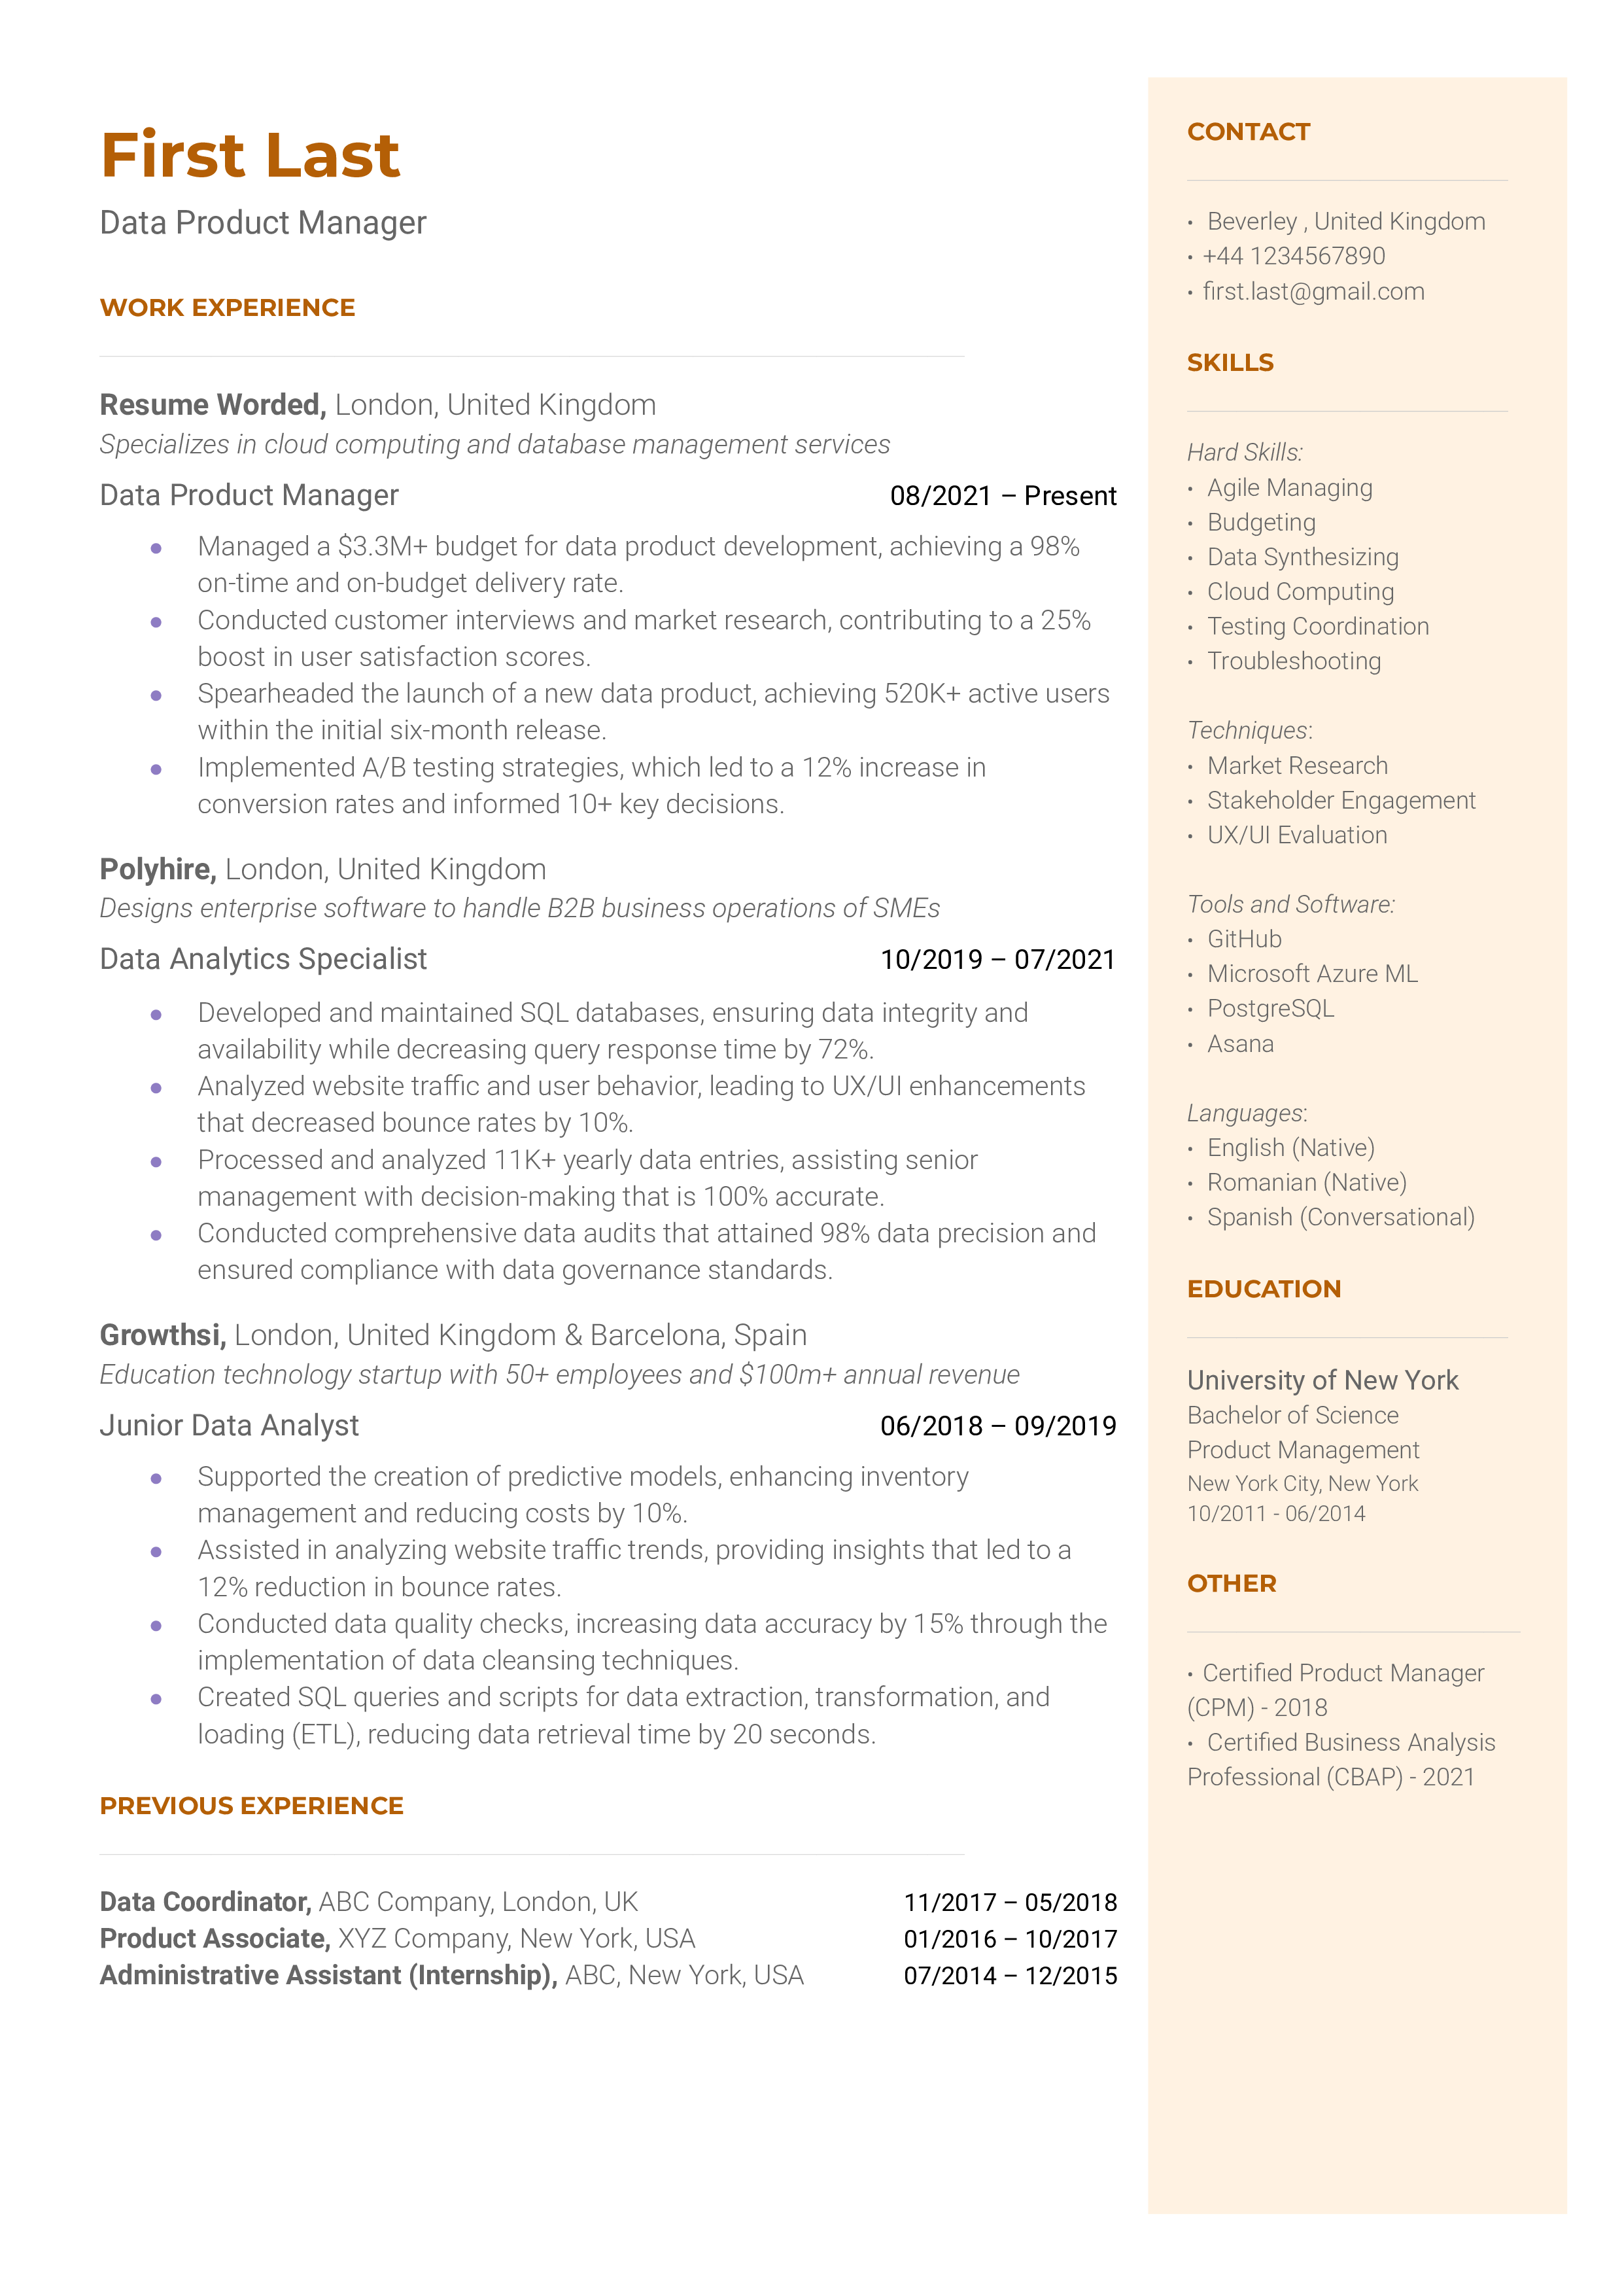 Data Product Manager Resume Sample